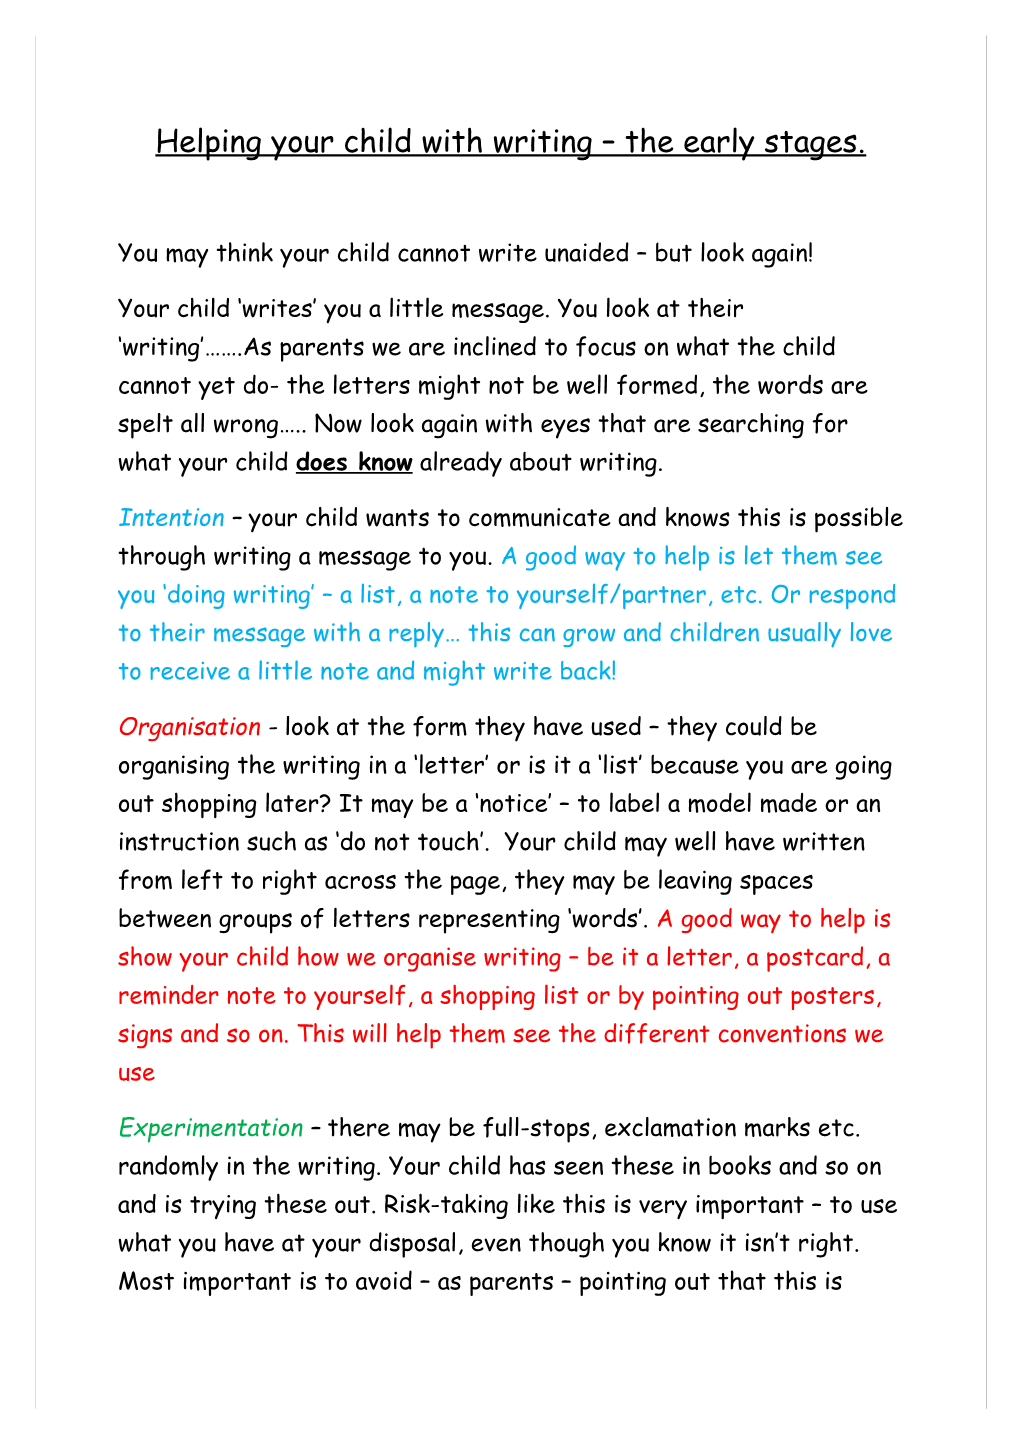 Helping Your Child with Writing the Early Stages